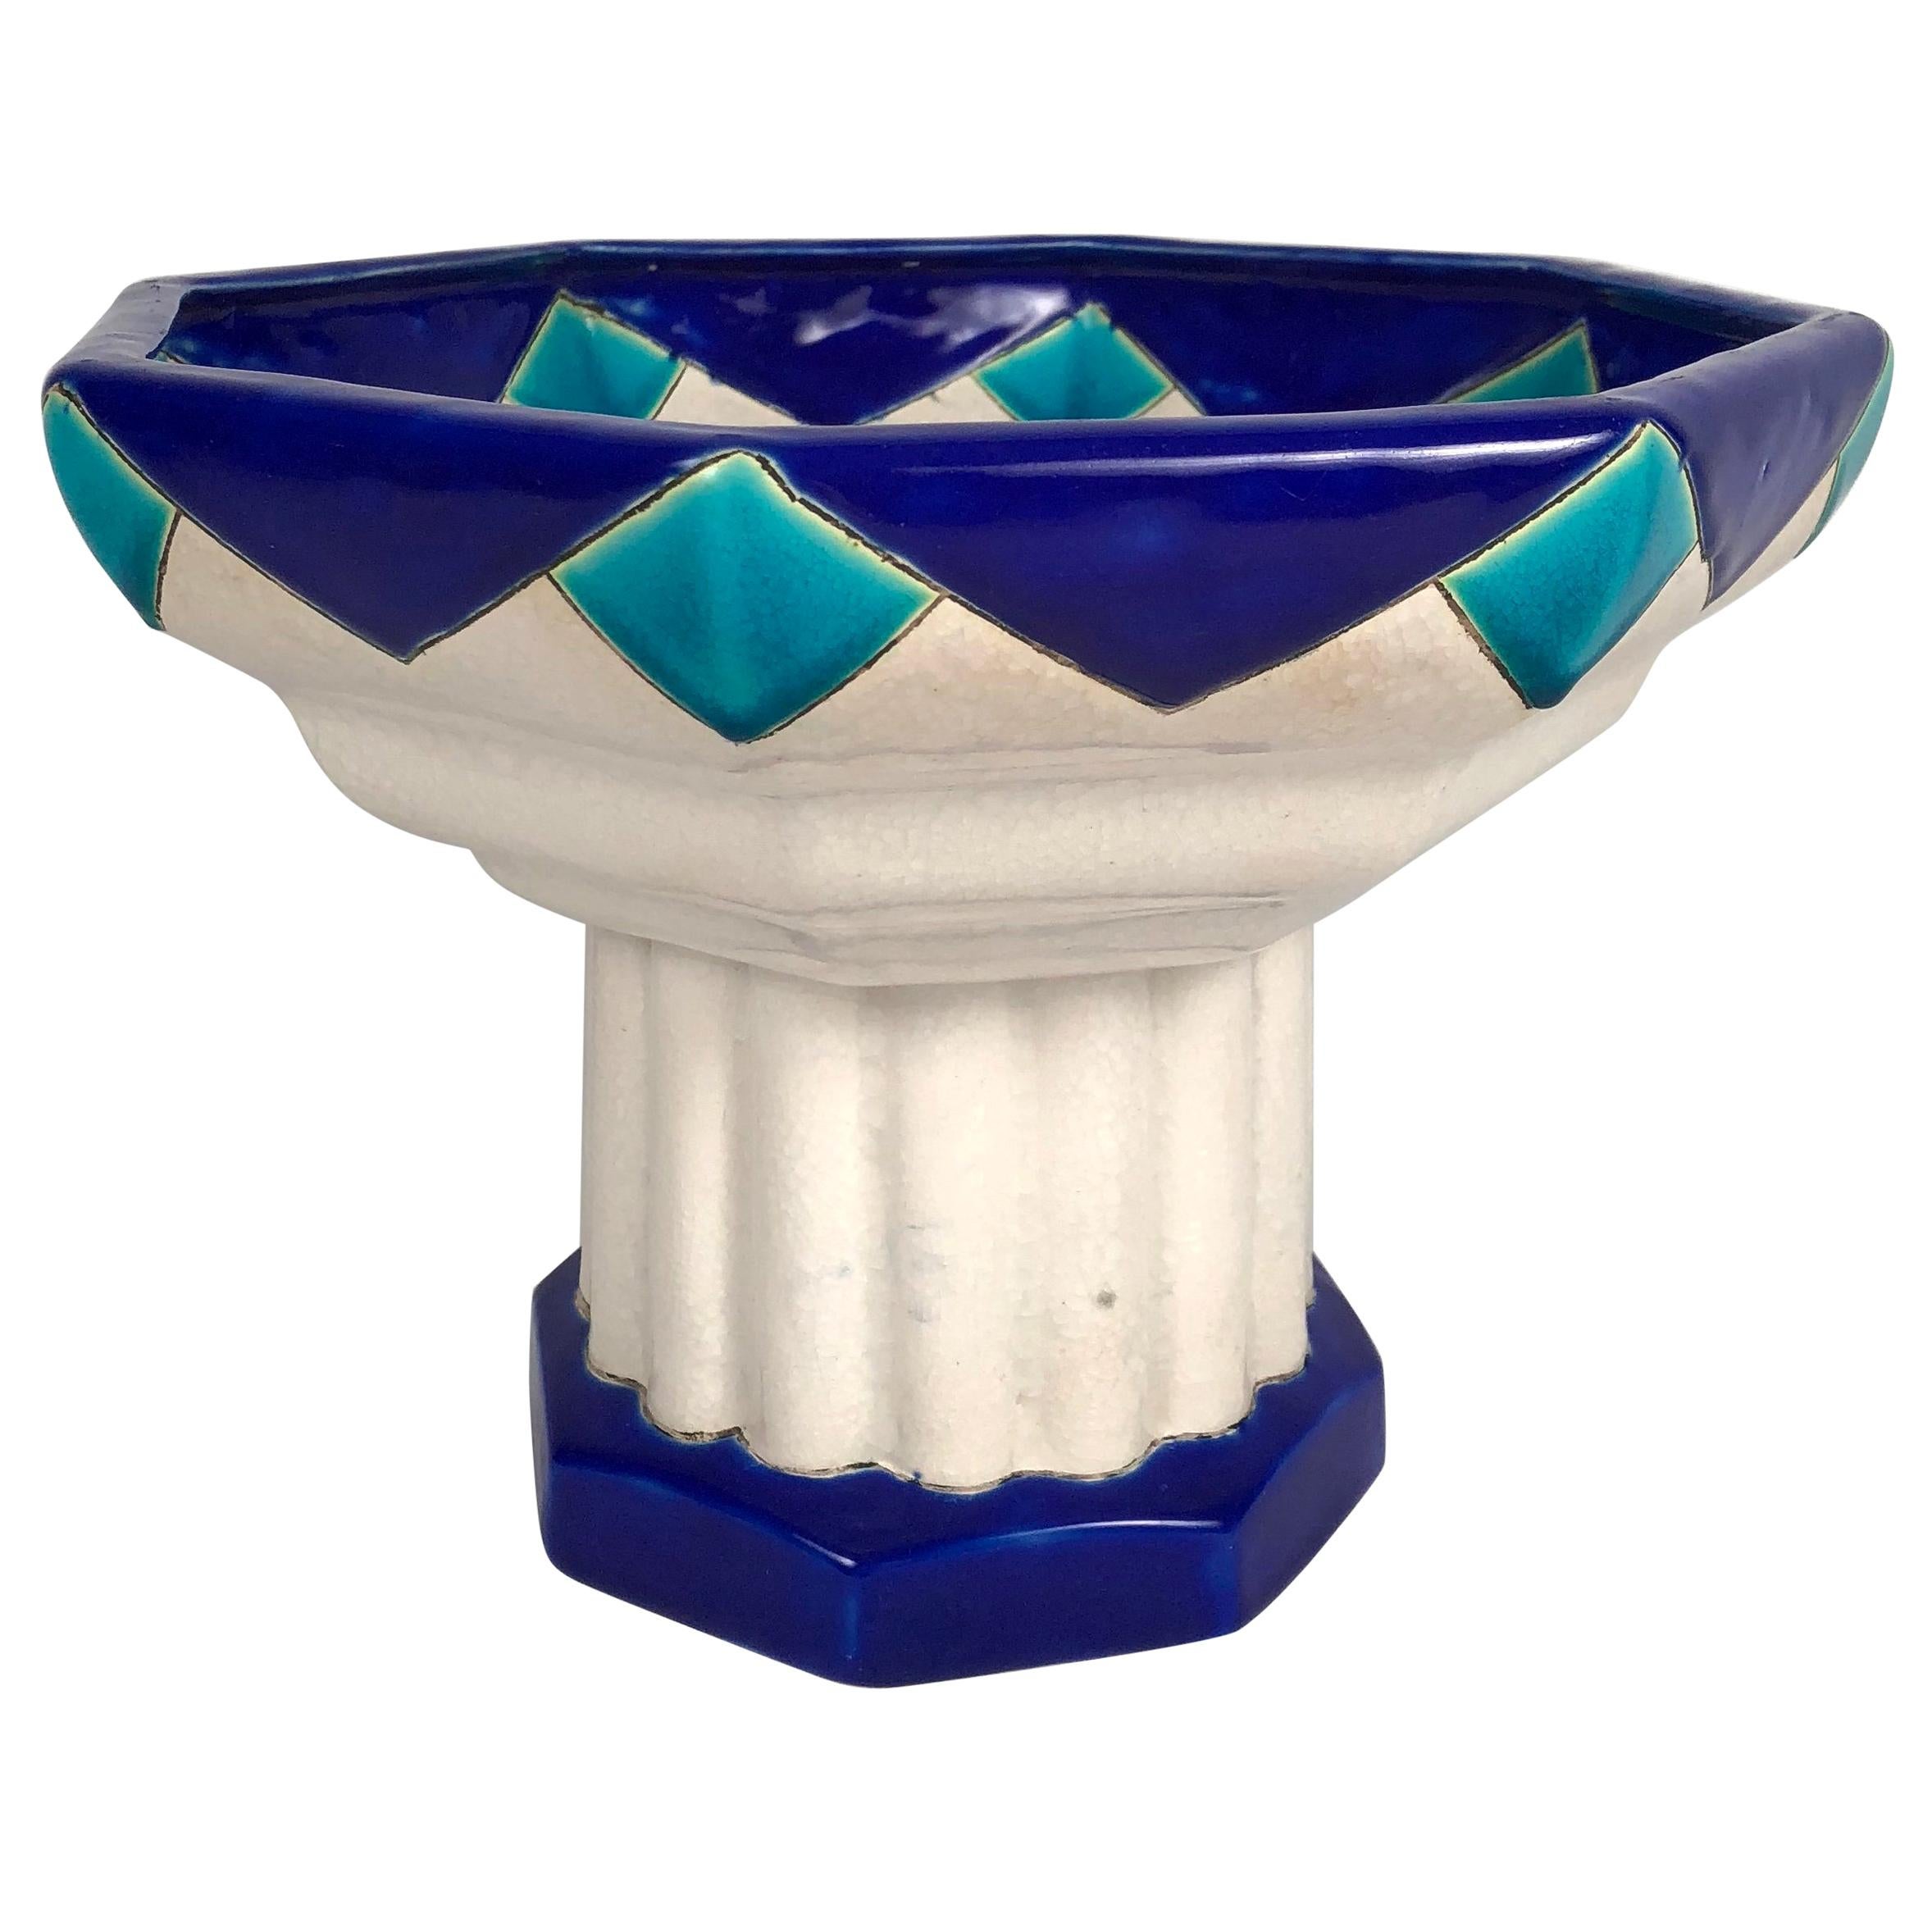 Art Deco Period Blue Turquoise and White Ceramic Footed Bowl by Boch Fr�ères